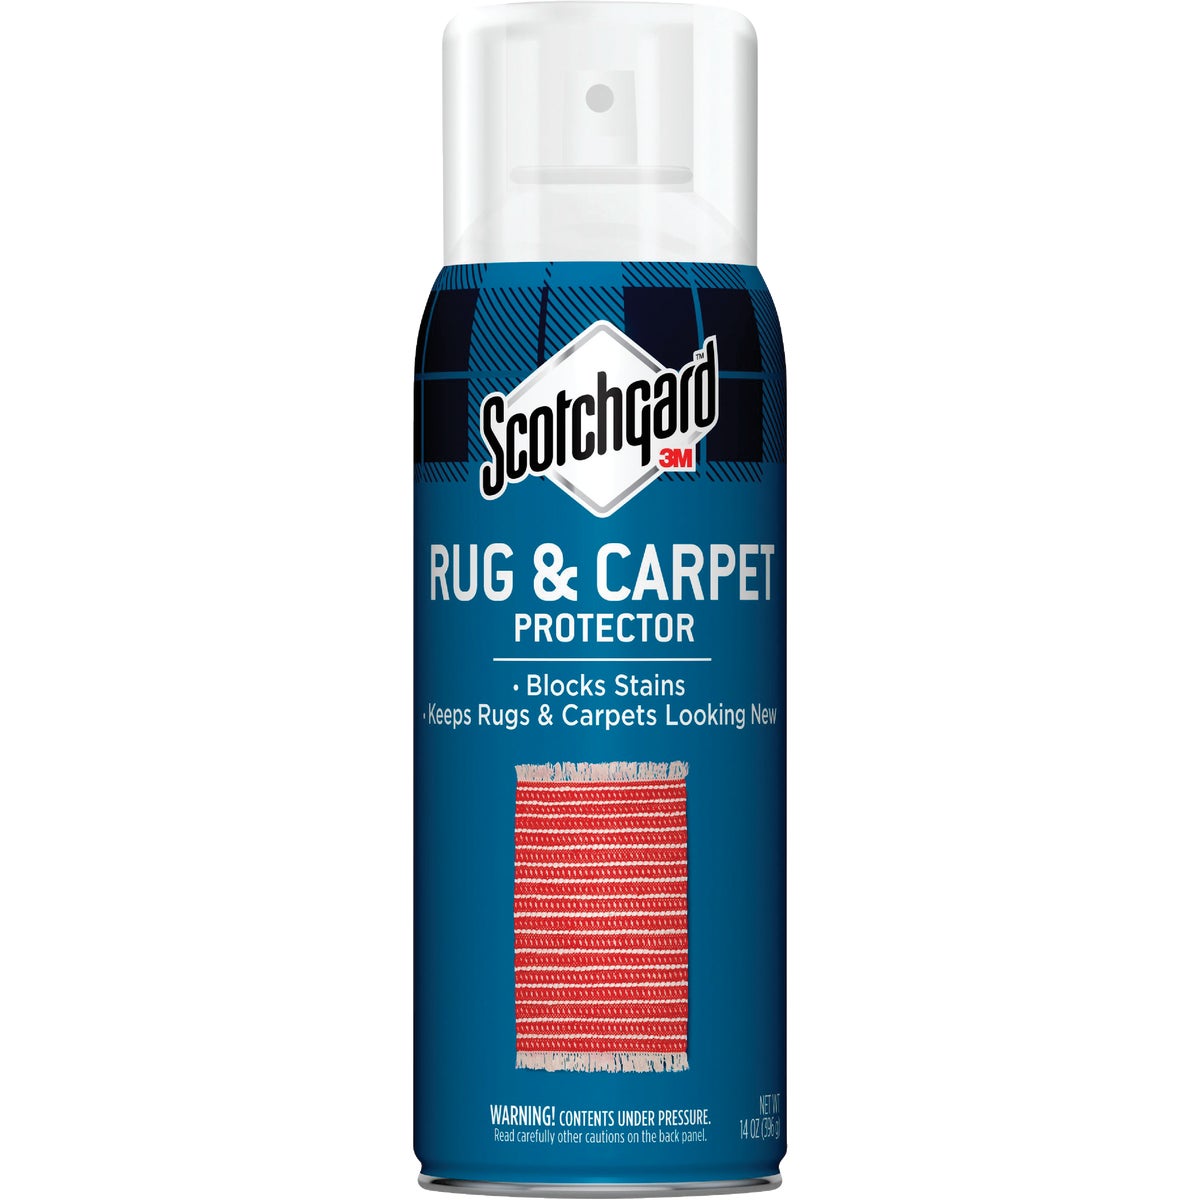 Item 622222, Keep your carpet and rugs looking new with Scotchgard Rug &amp; Carpet 